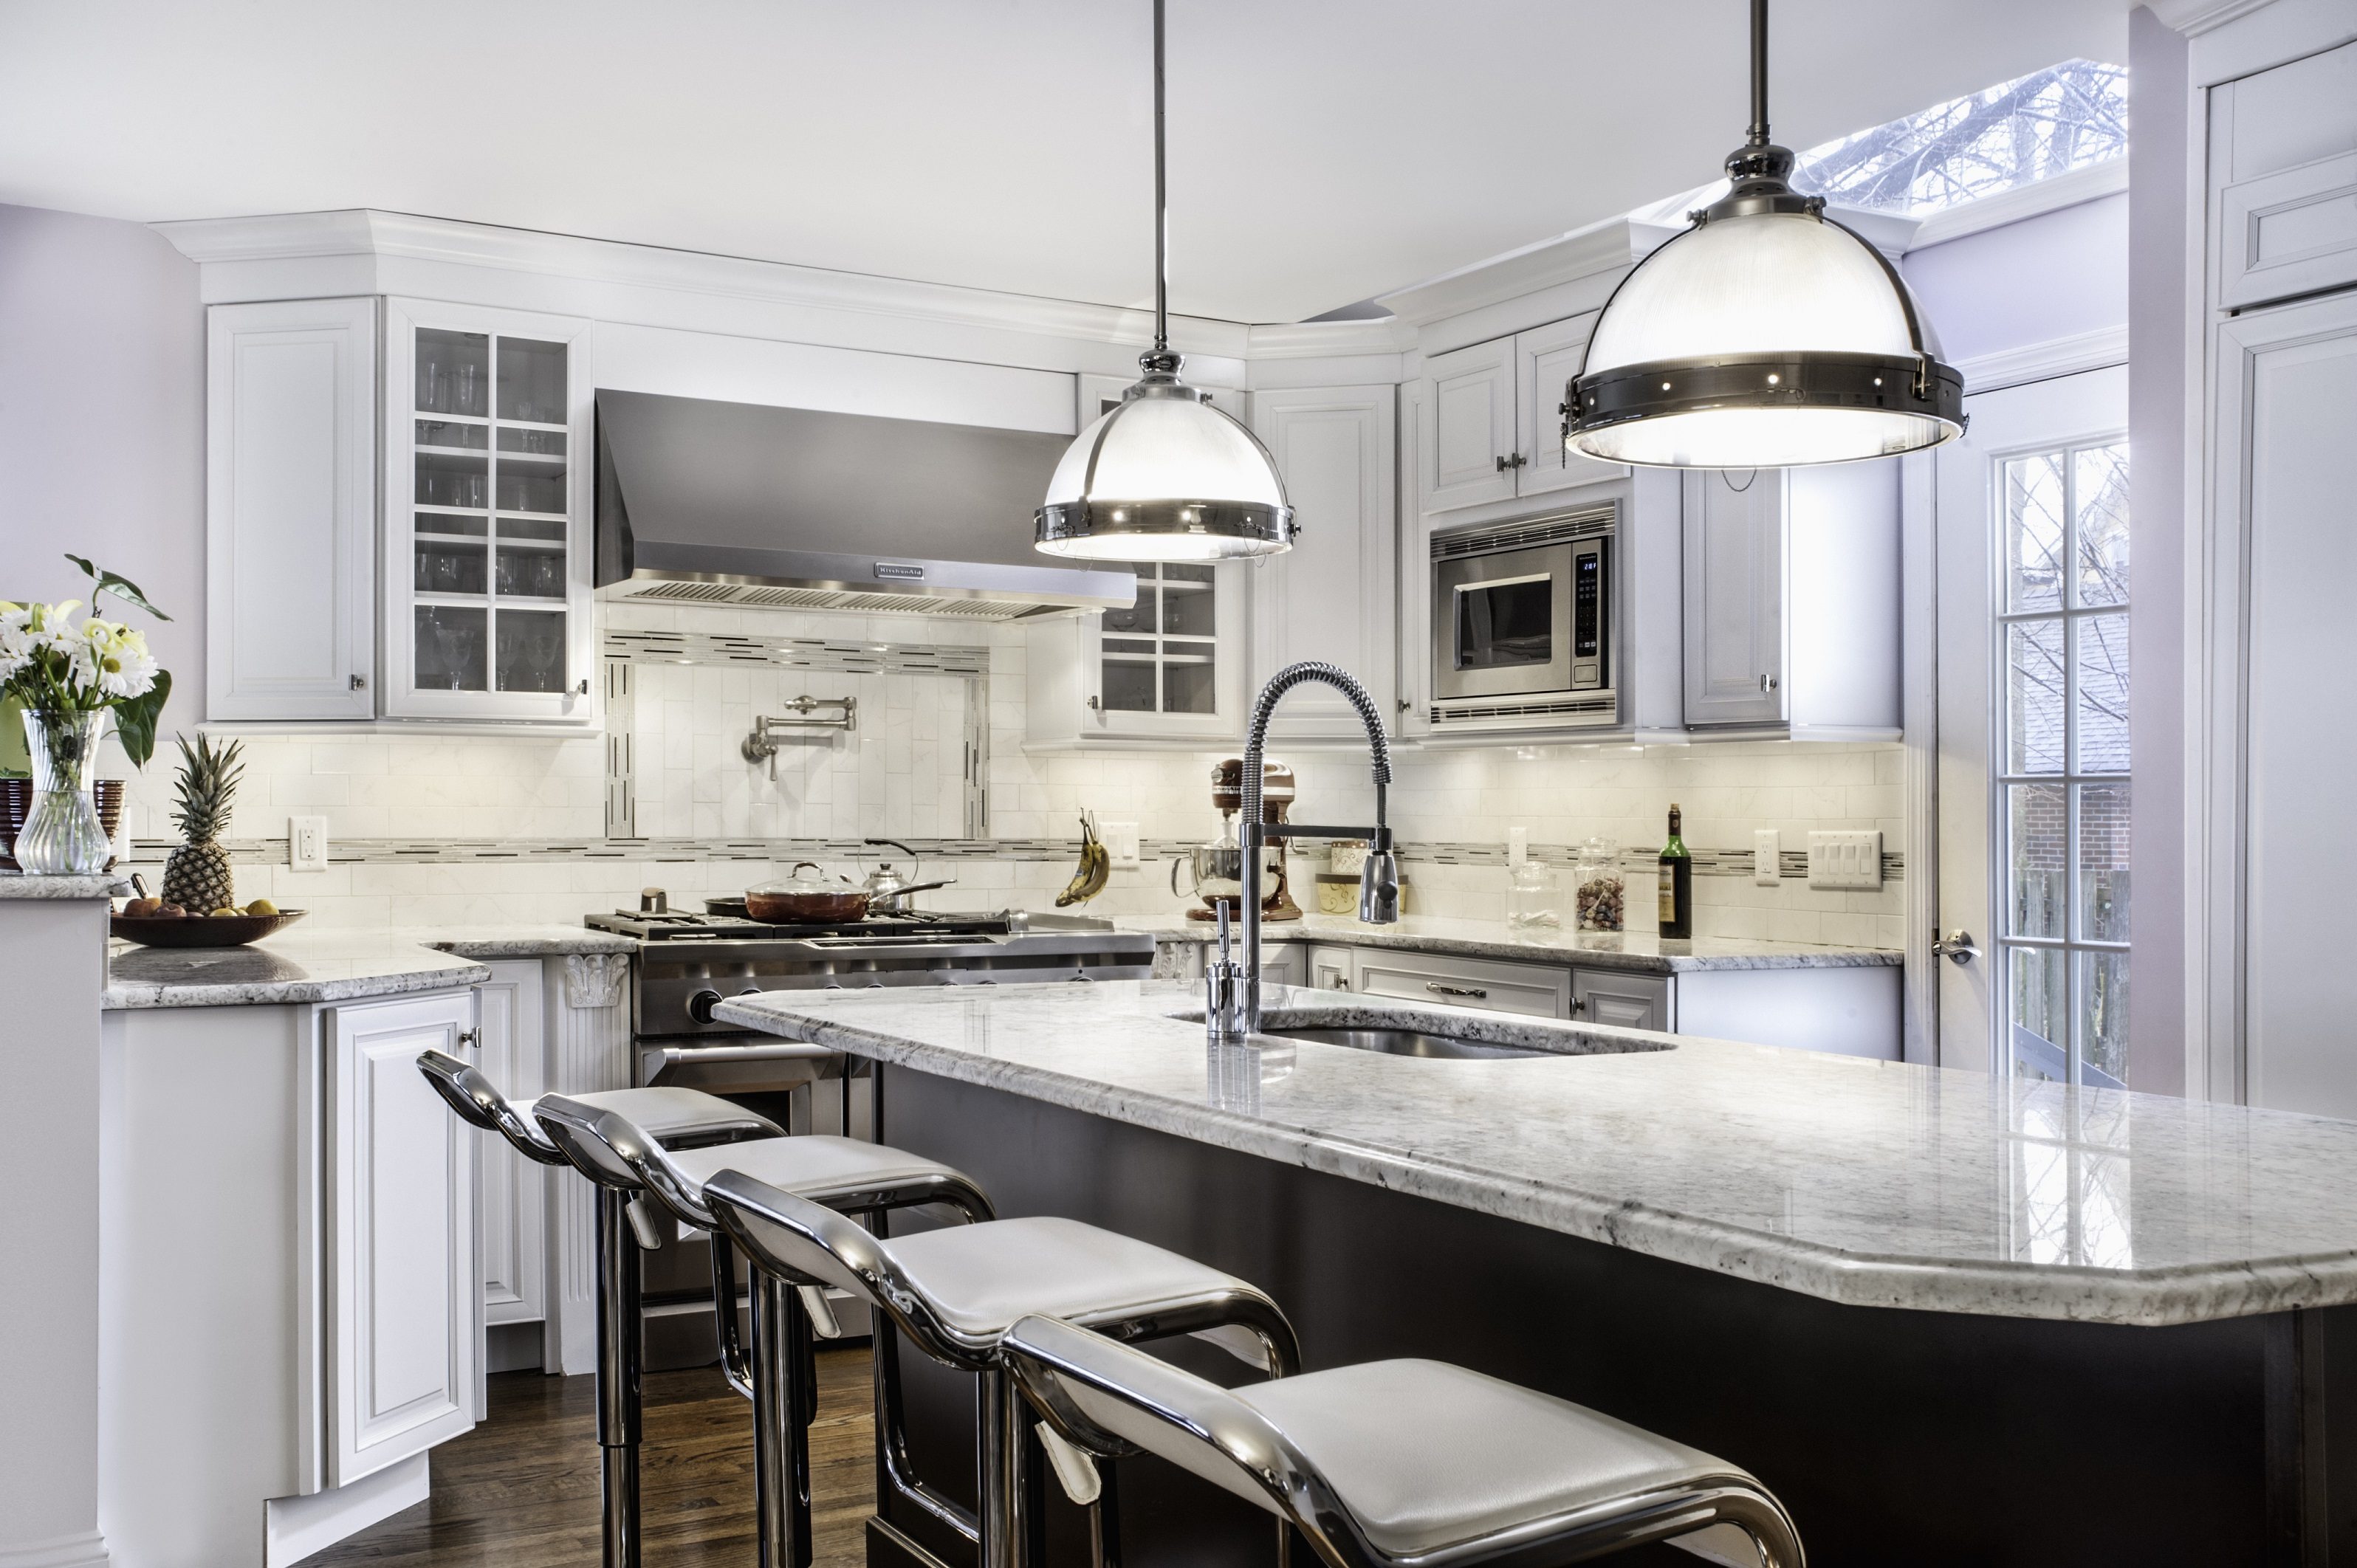 Kitchen with pendant lighting and stools